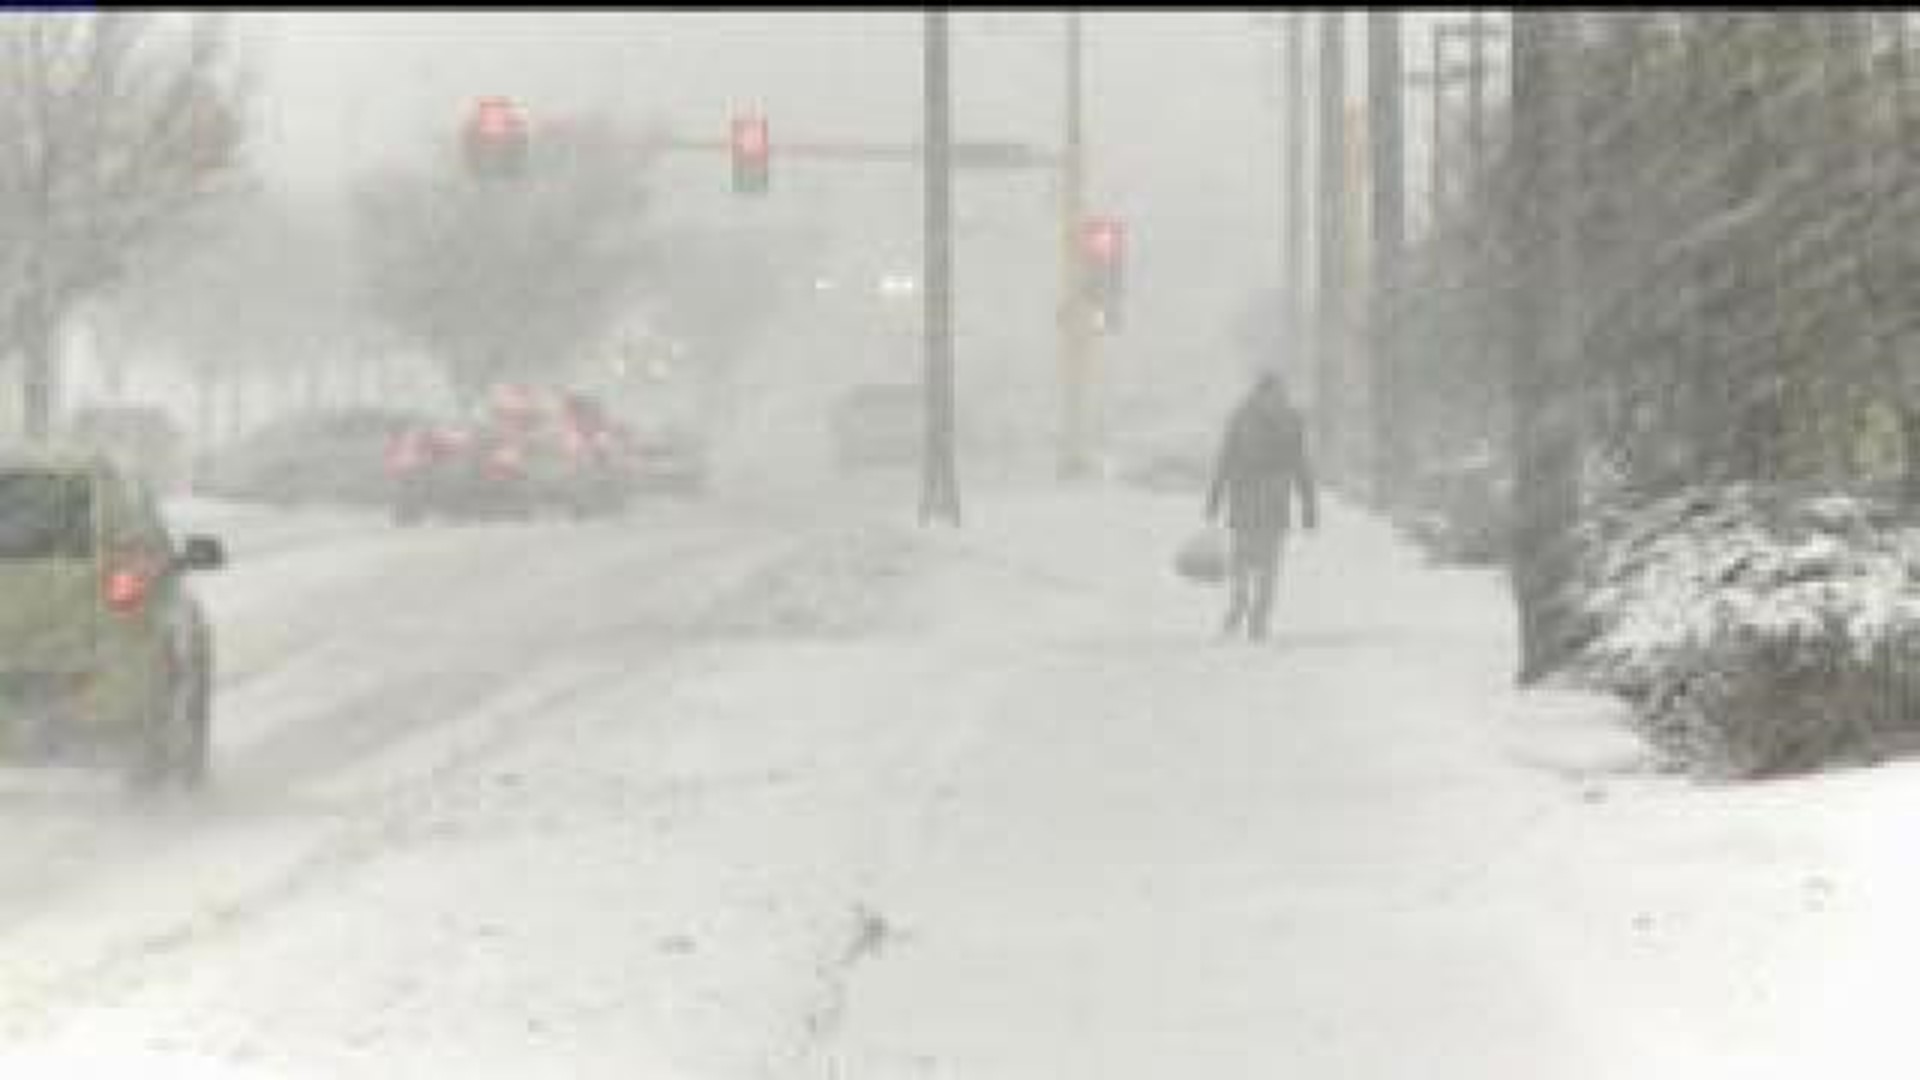 Winter weather makes its way across the country